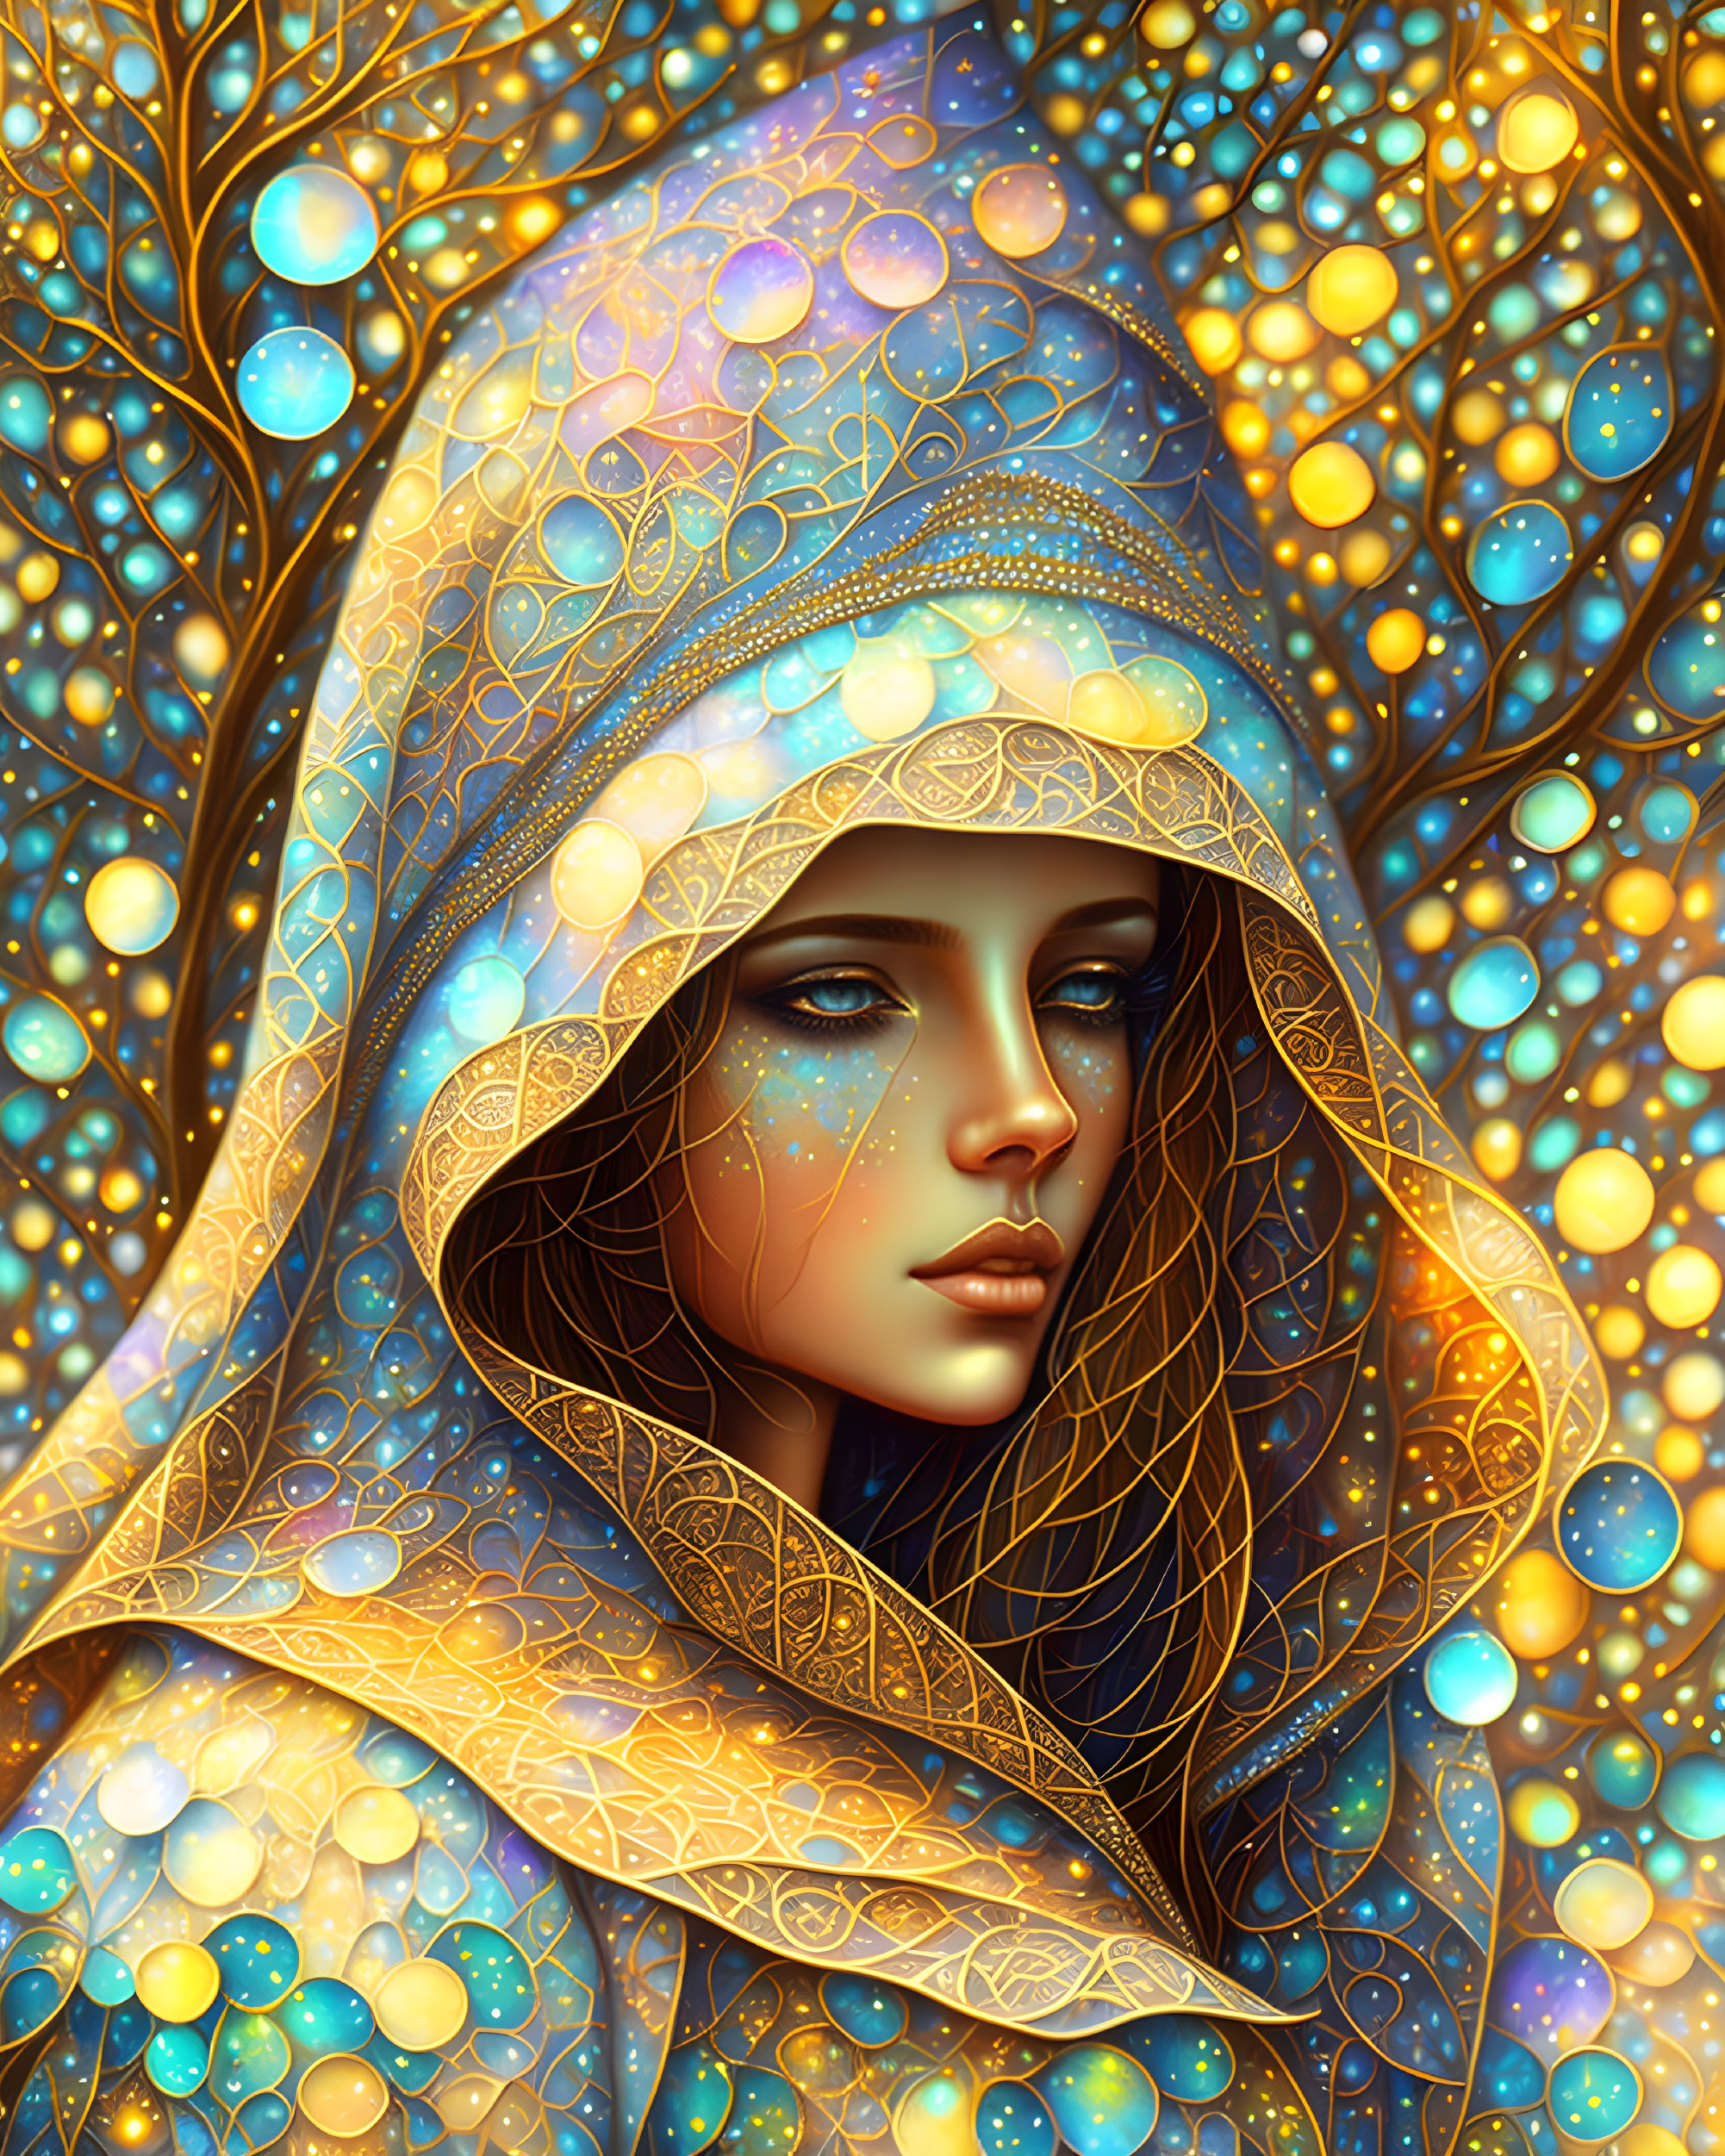 Golden hooded woman surrounded by glowing orbs and tree patterns